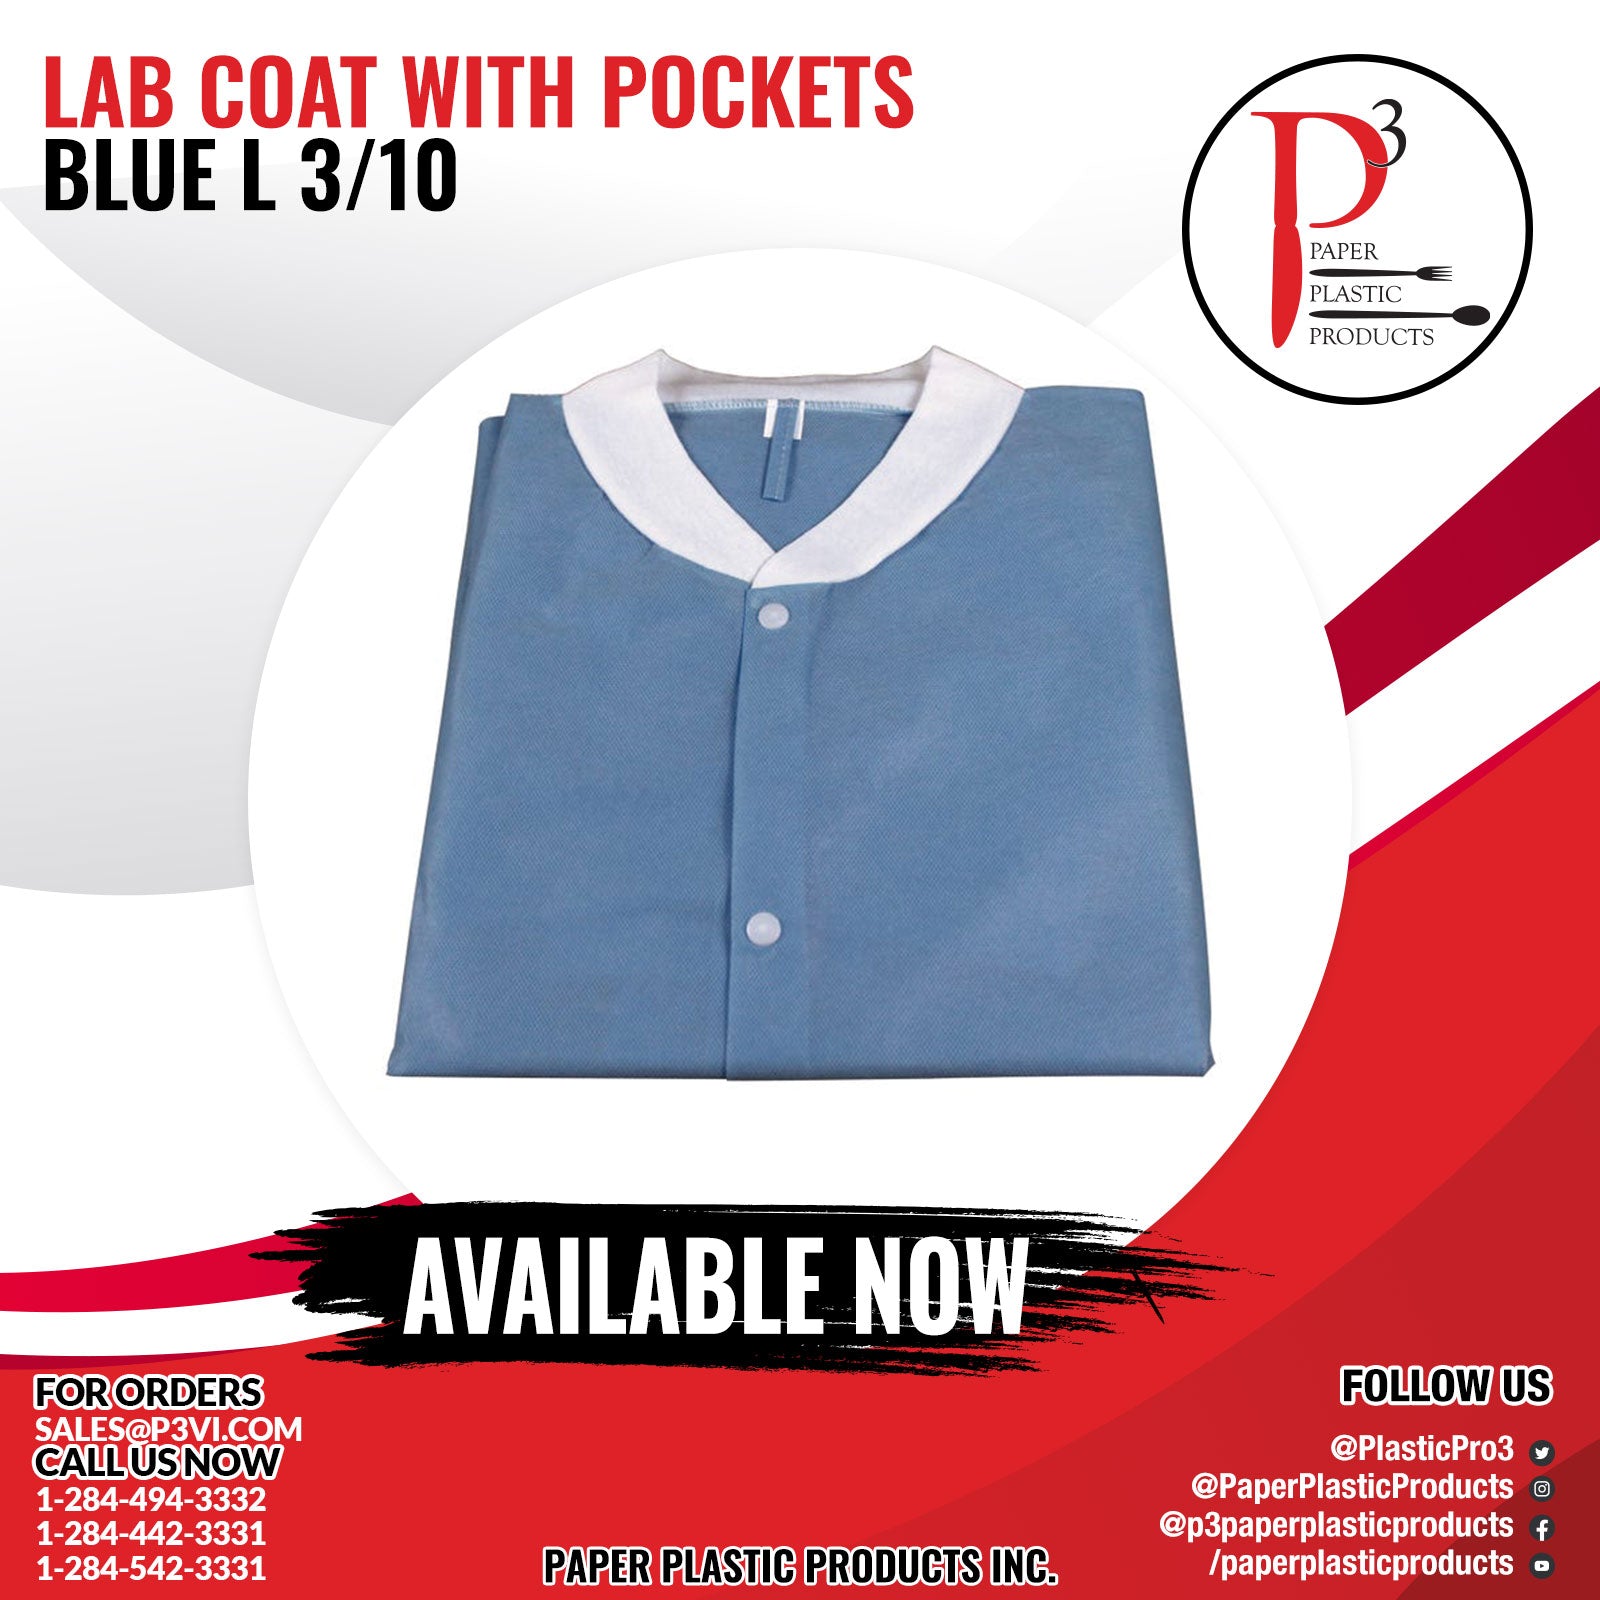 Lab Coat with Pockets Blue L 1/3/10